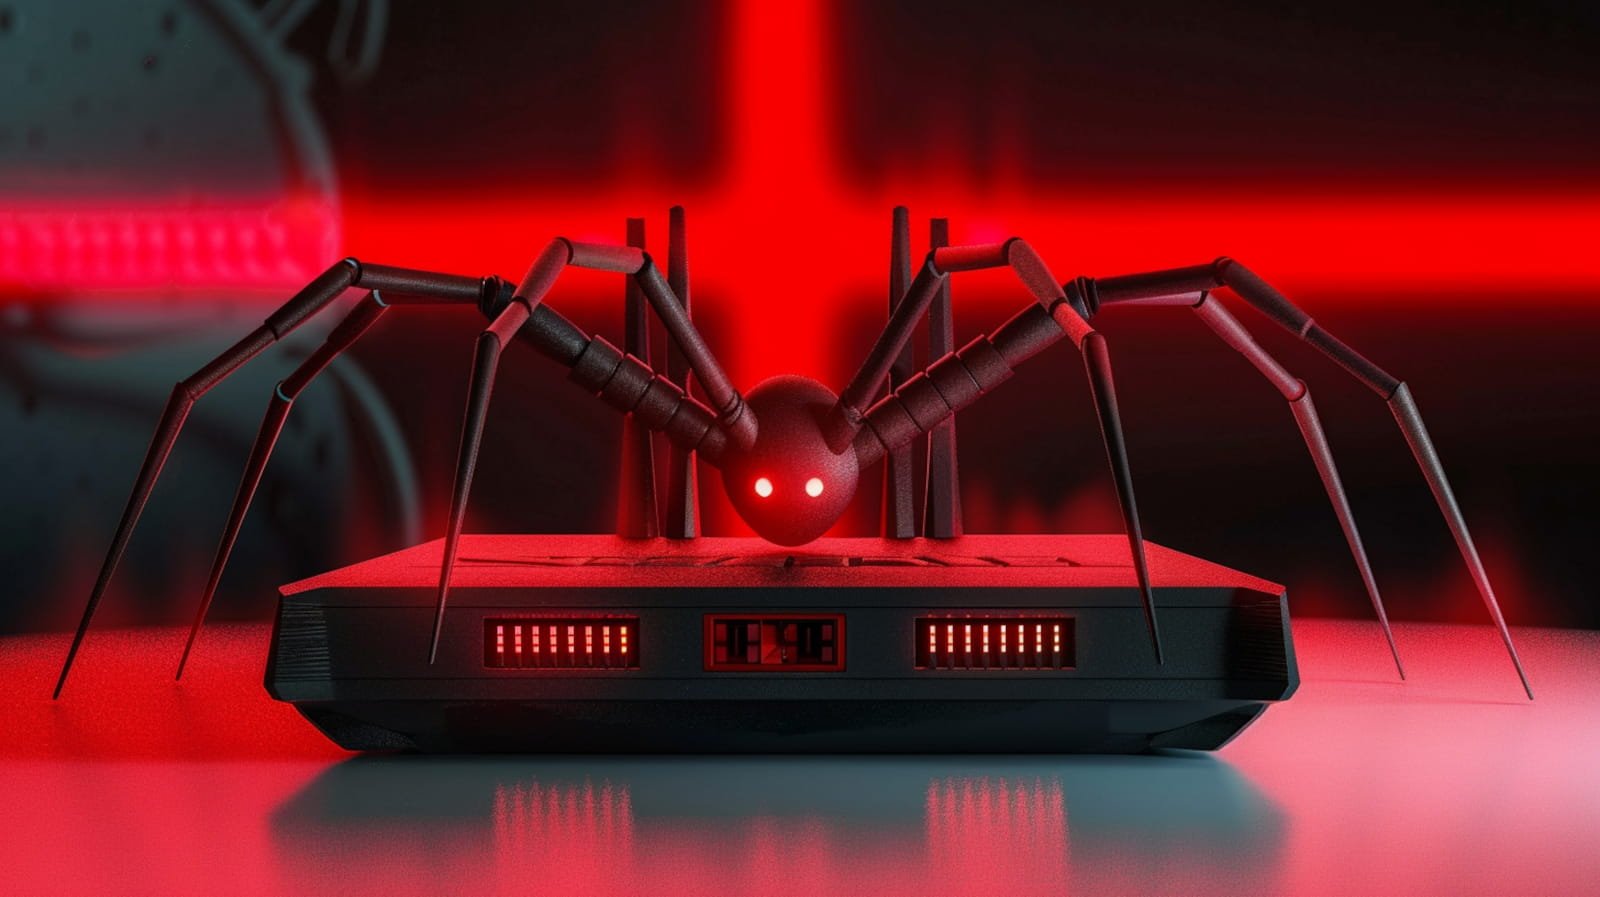 Infected router